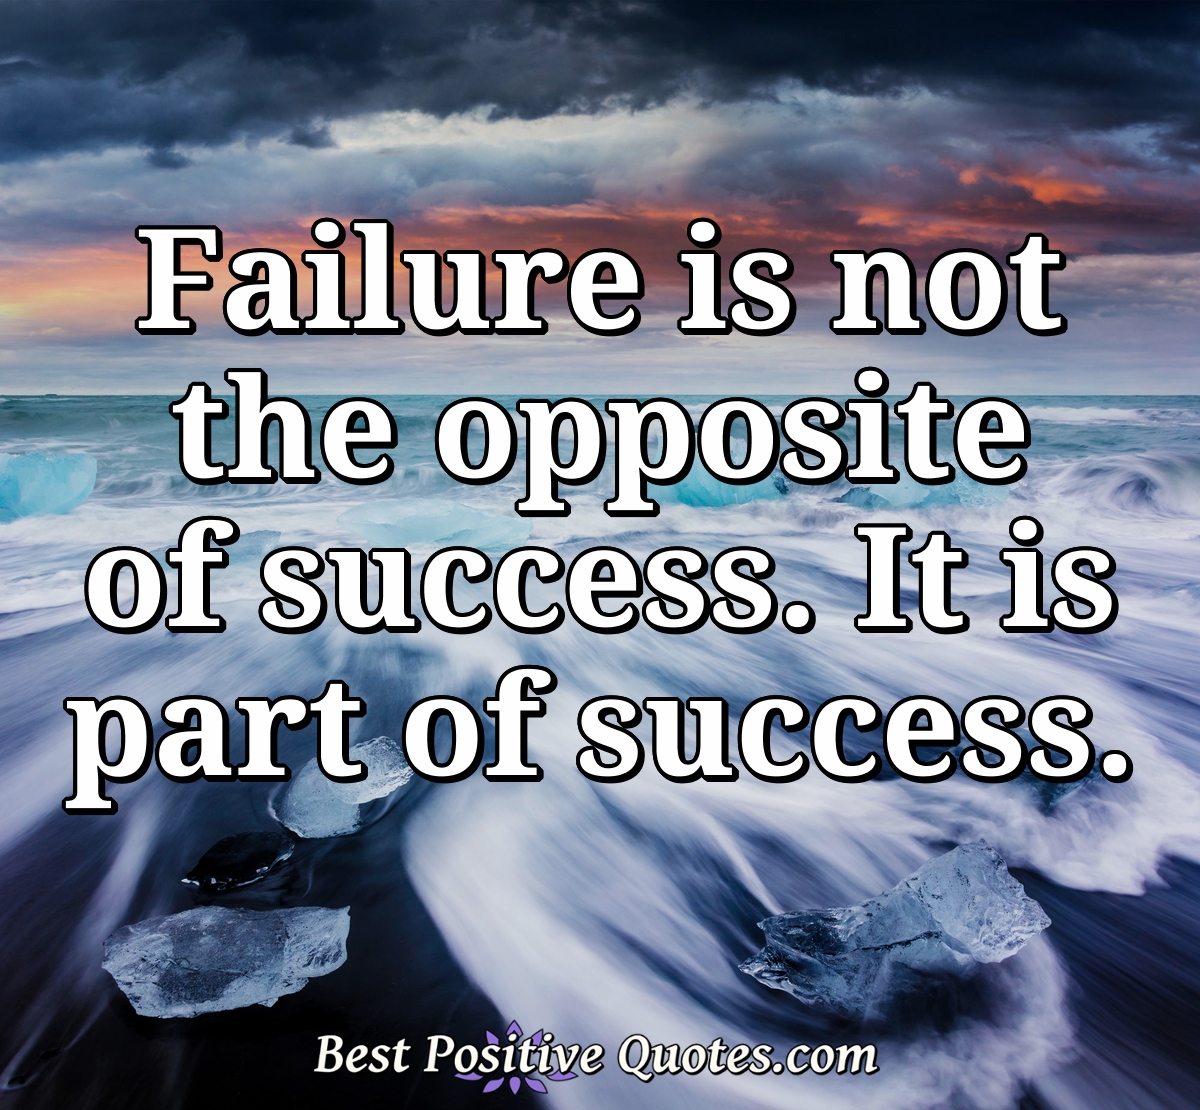 Failure is not the opposite of success. It is part of success. - Anonymous